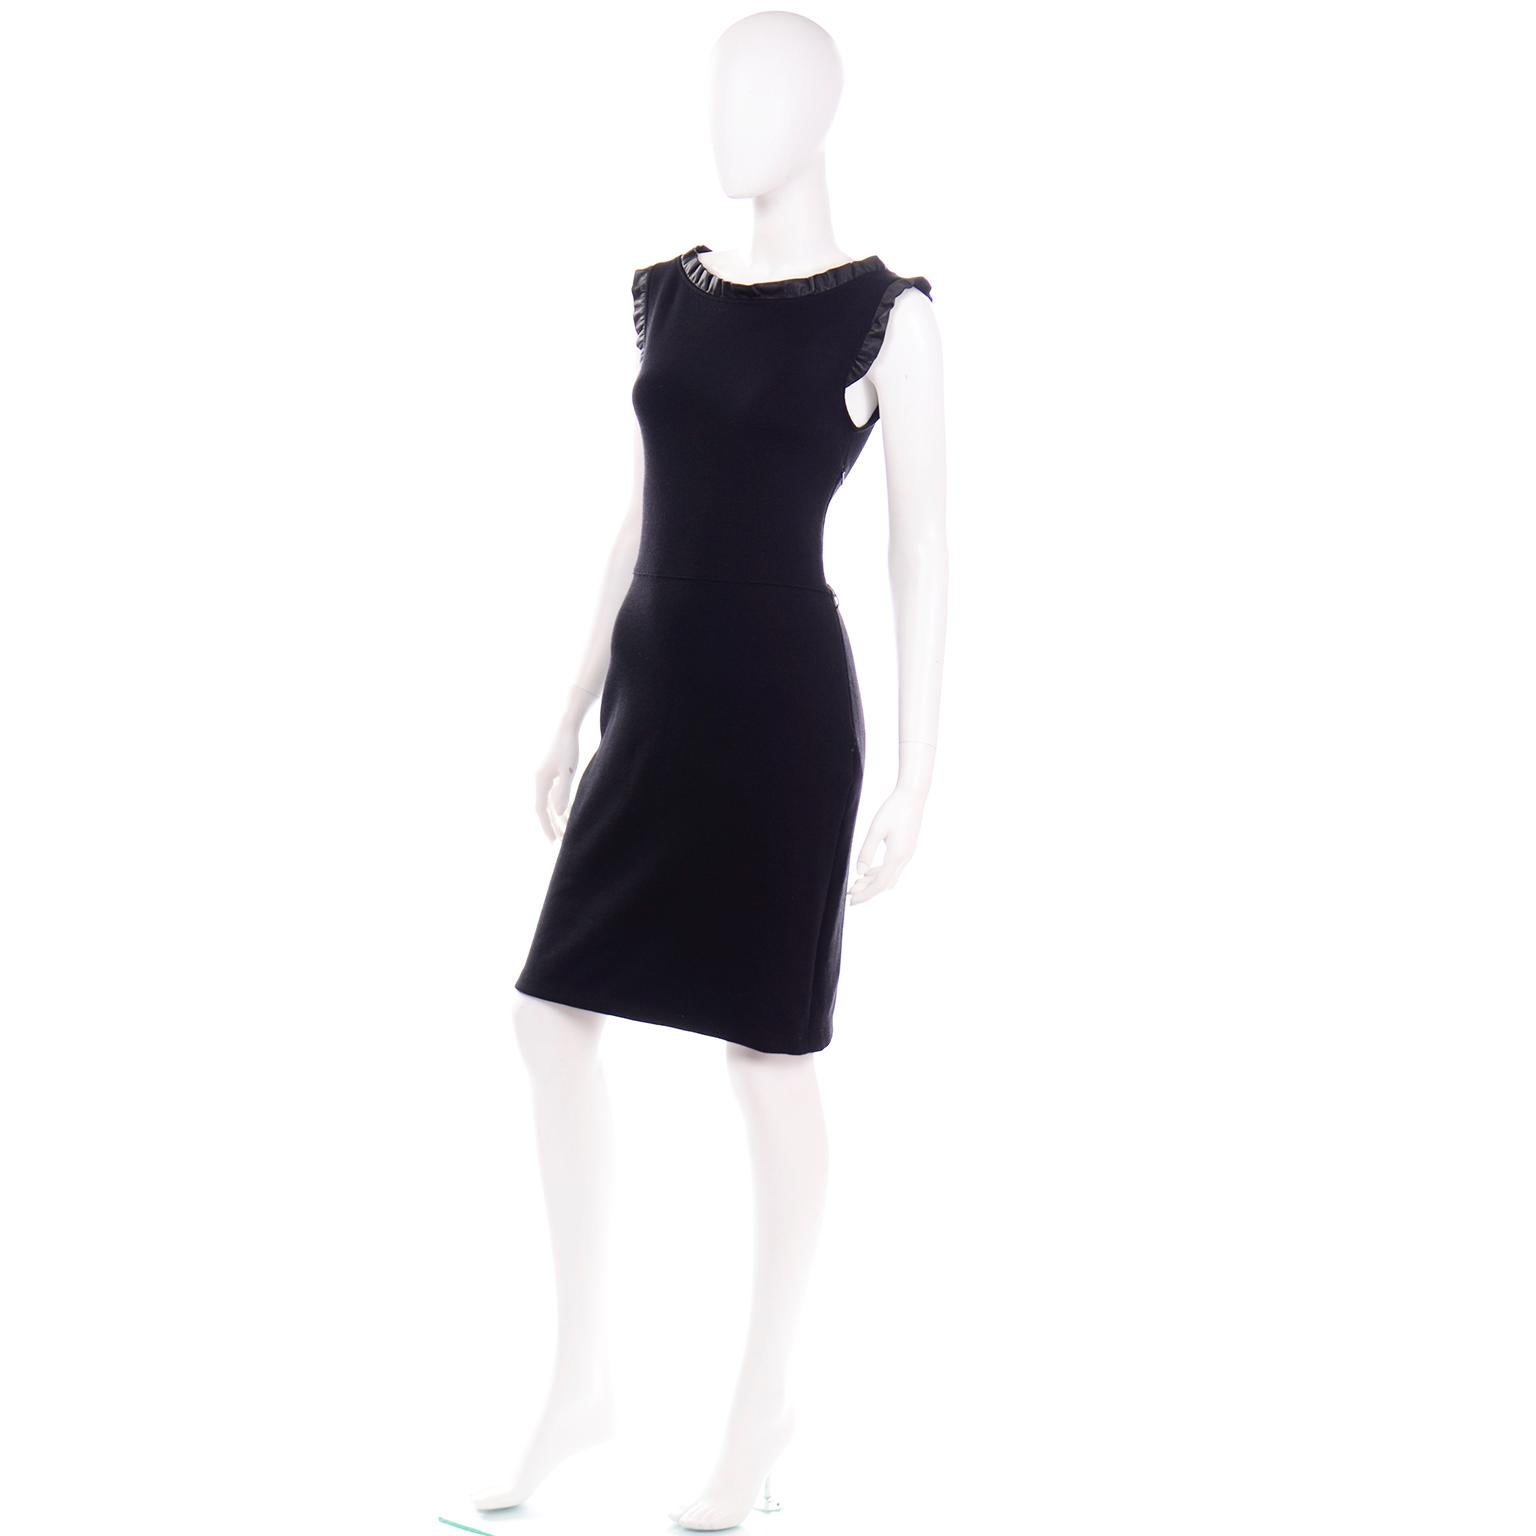 This is an incredible Christian Dior cashmere, wool, silk knit blend sheath dress with a leather ruffled trim. This chic sleeveless dress has a bateau neckline and closes with a side metal zipper. This is a timeless little black dress that can be